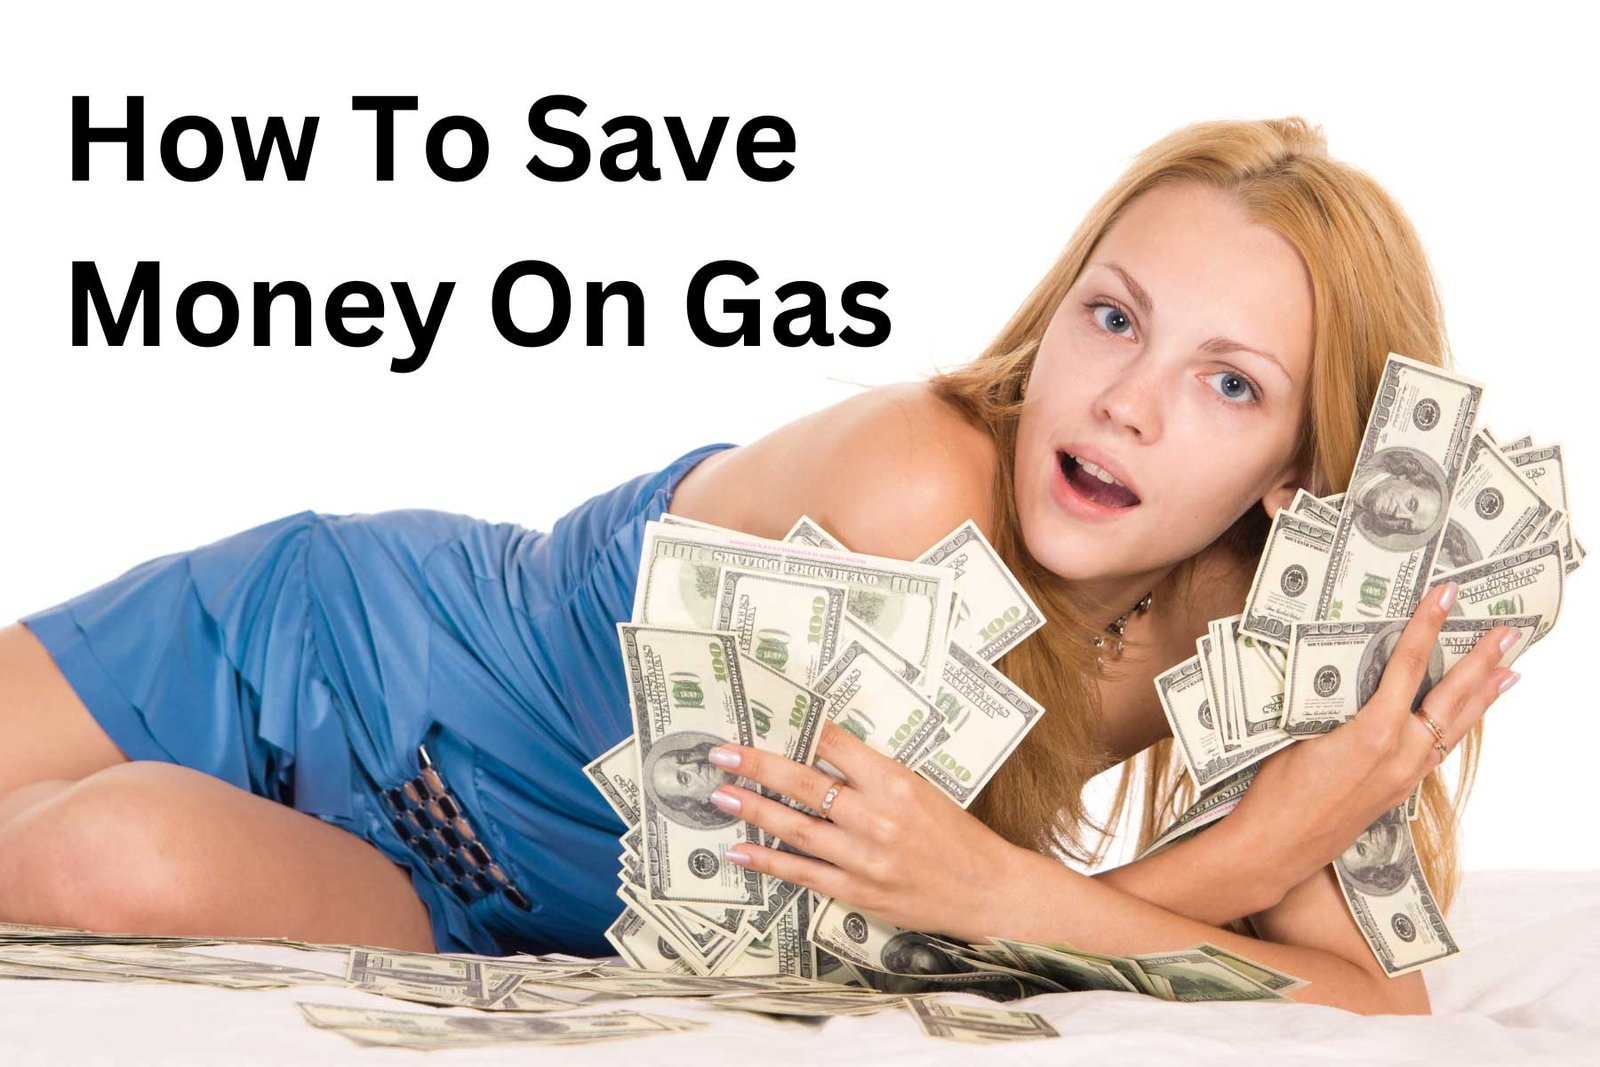 How-To-Save-Money-On-Gas-Sproutmentor